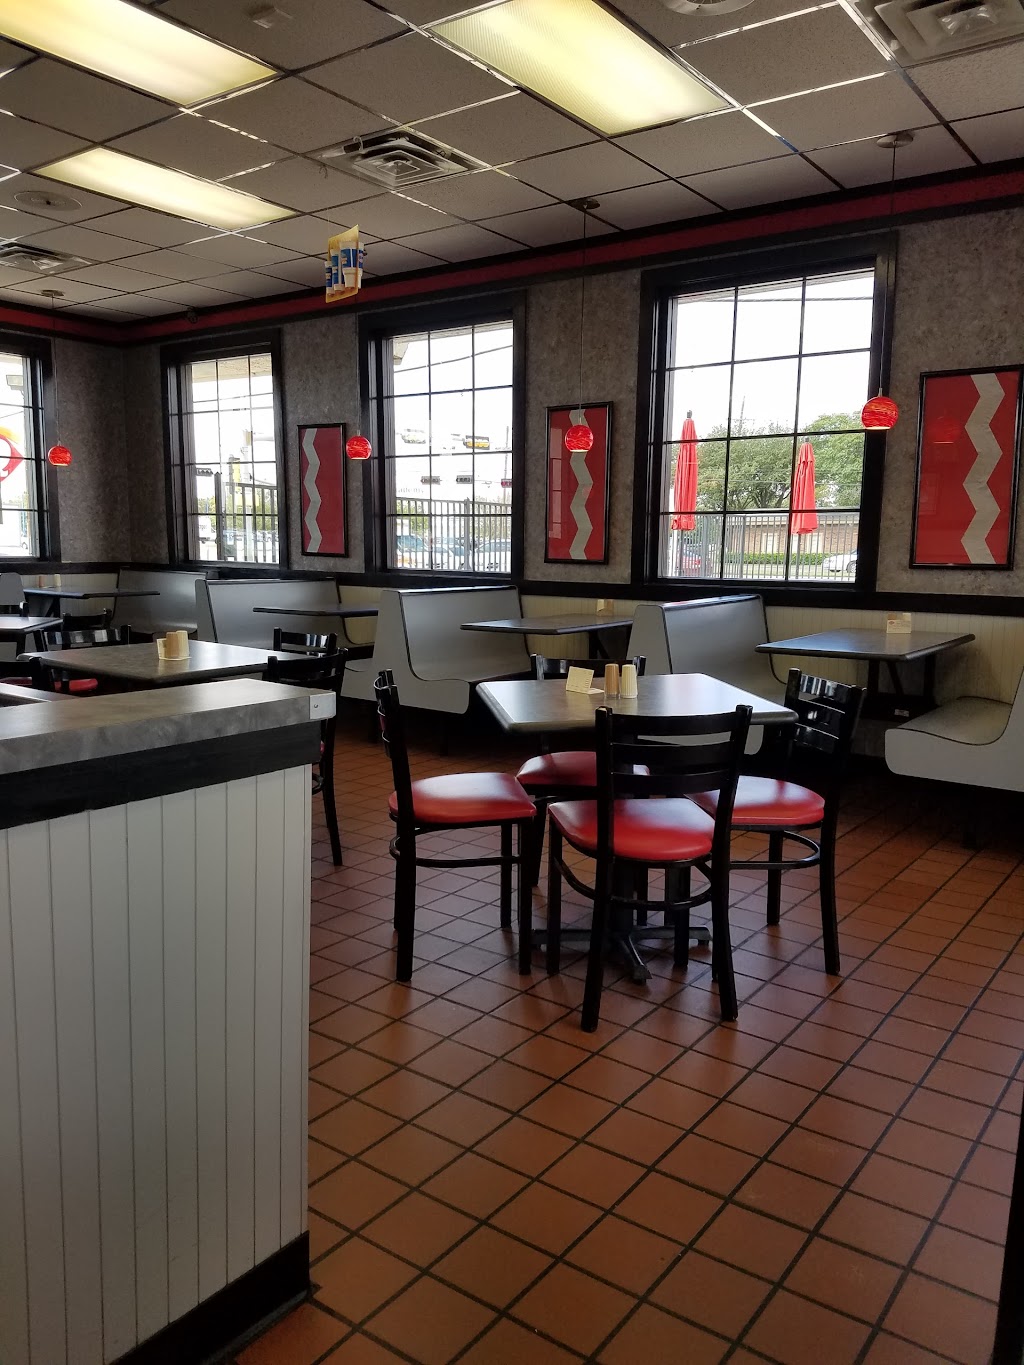 Dairy Queen | 5735 19th St, Lubbock, TX 79407 | Phone: (806) 792-6629